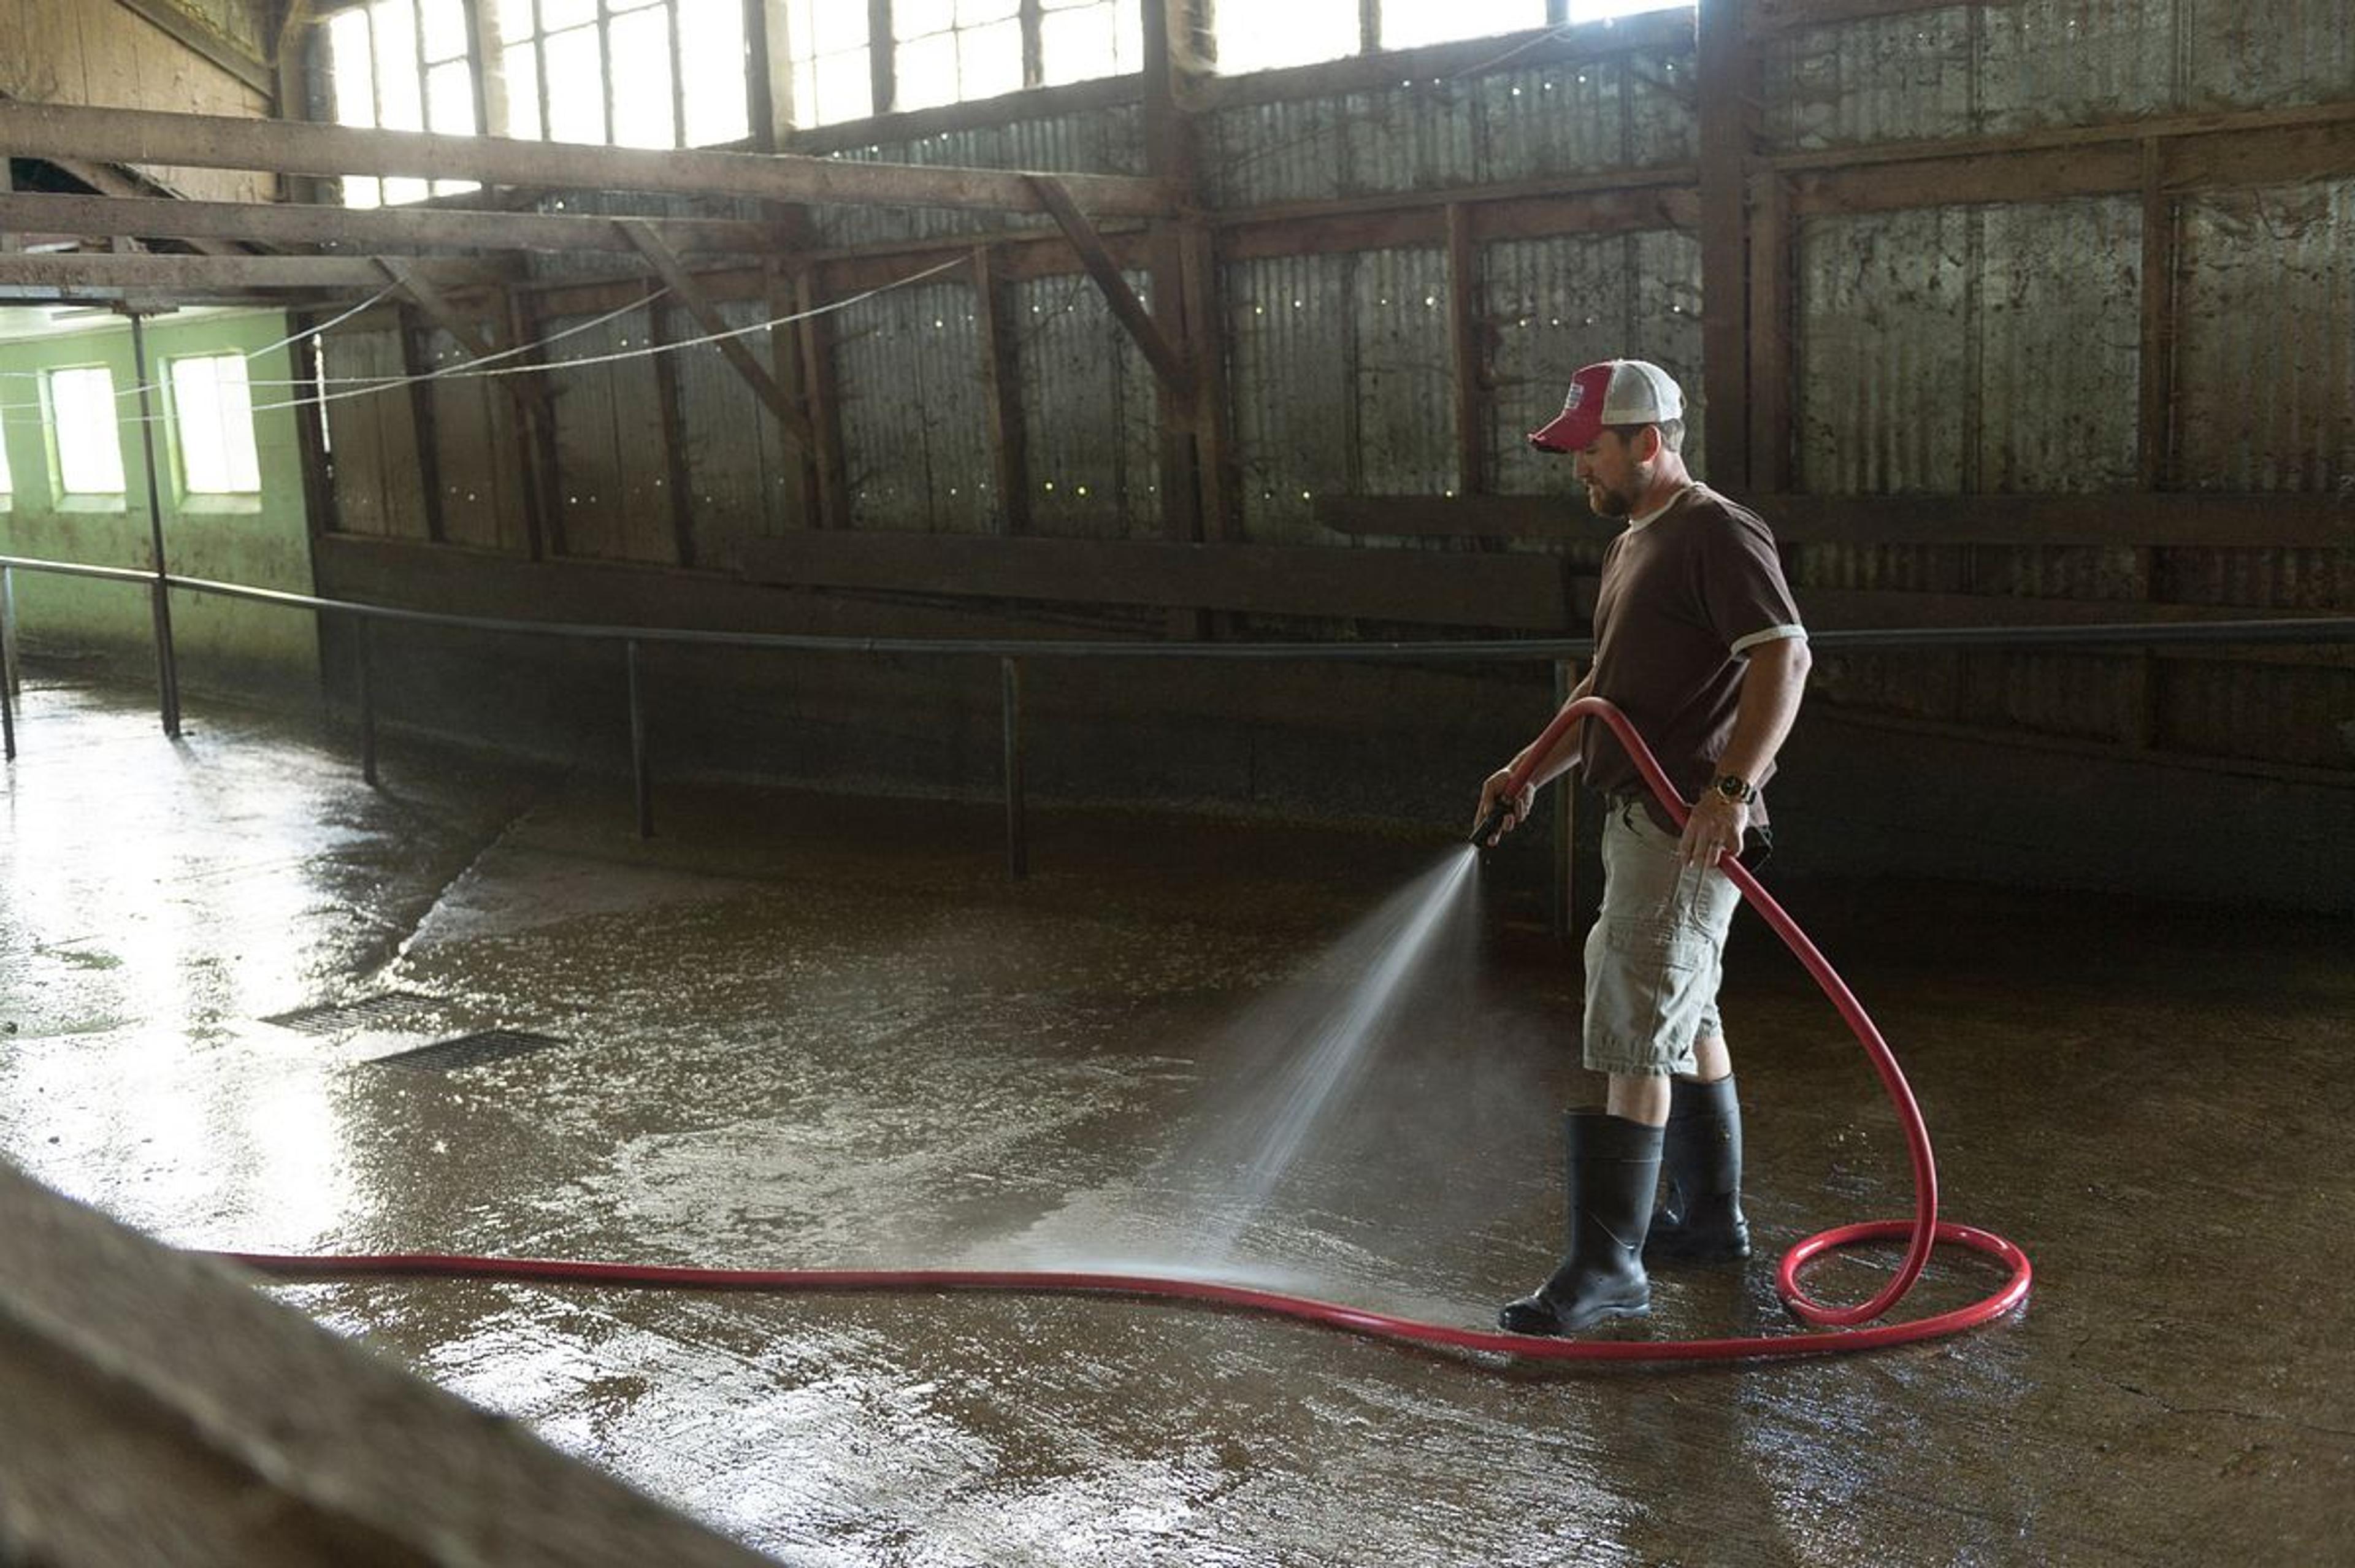 Farmer cleans out the barn for the cows with a hose at an organic farm in Washington.